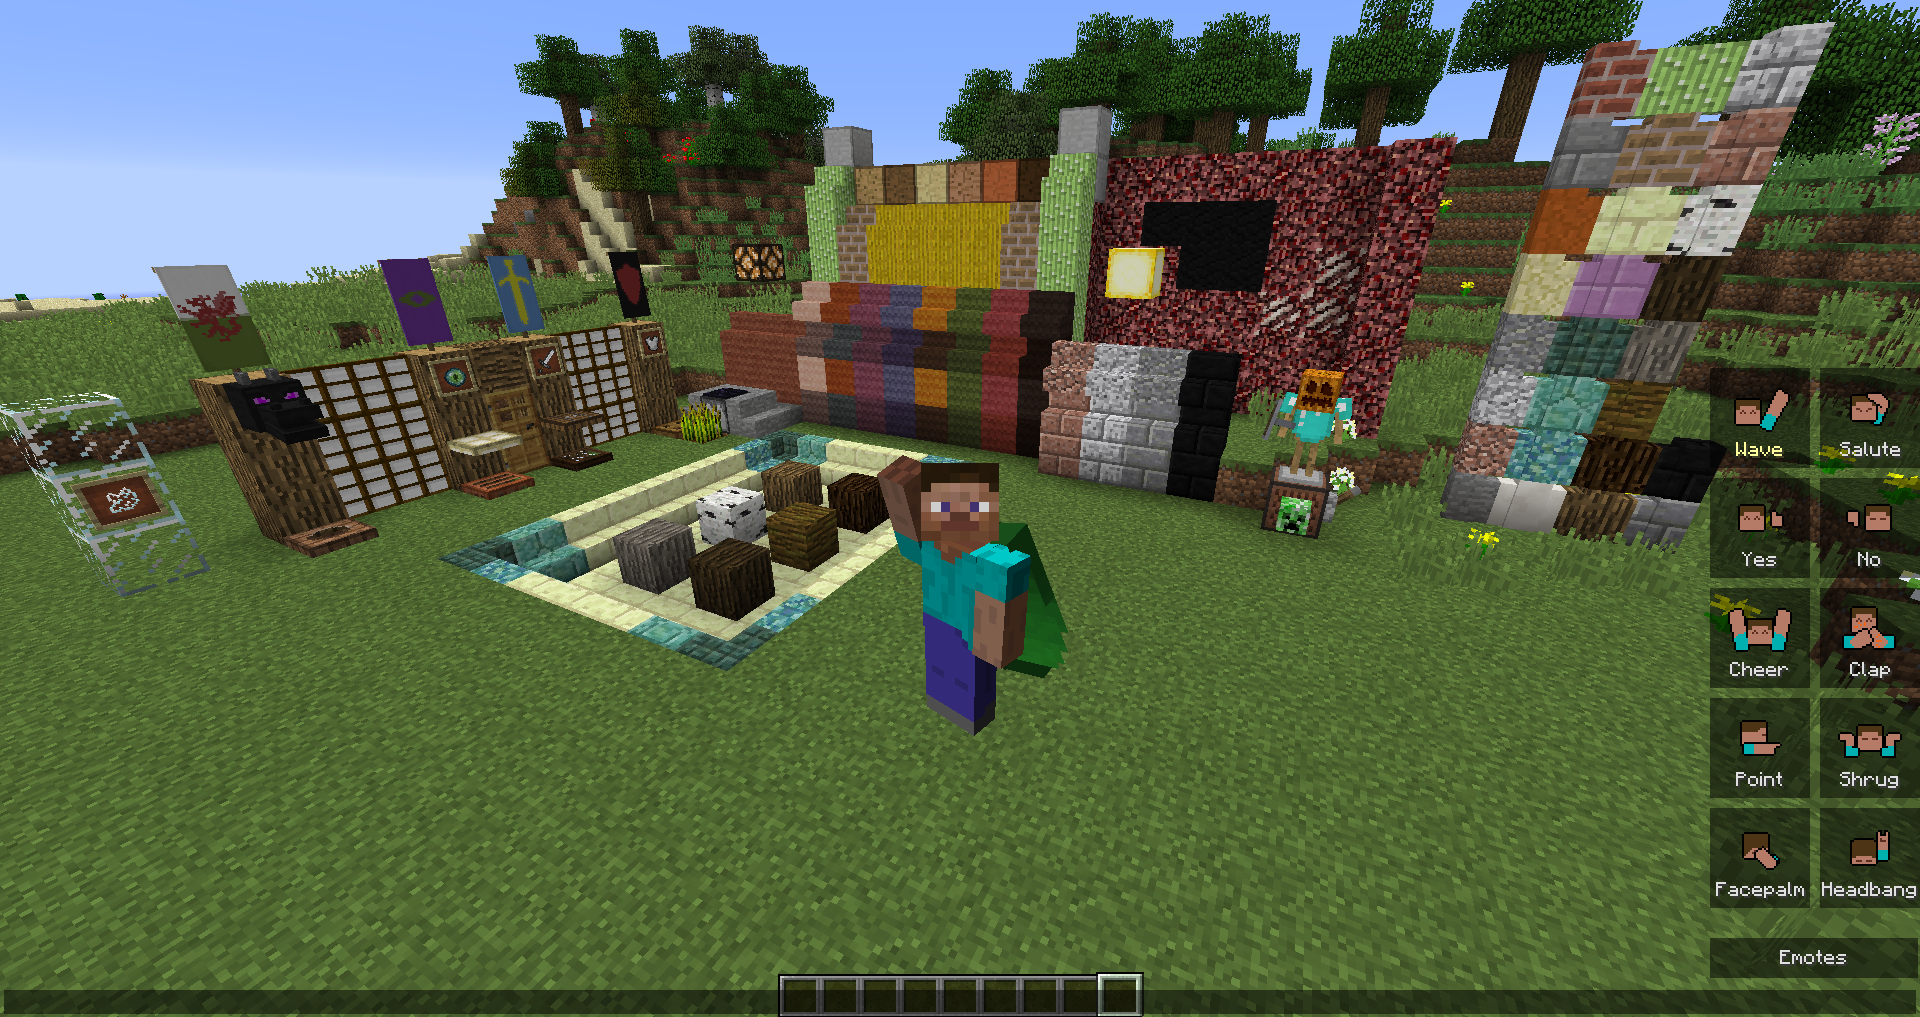 Mad for Minecraft: Why do people “dig” this classic game? – Periscope